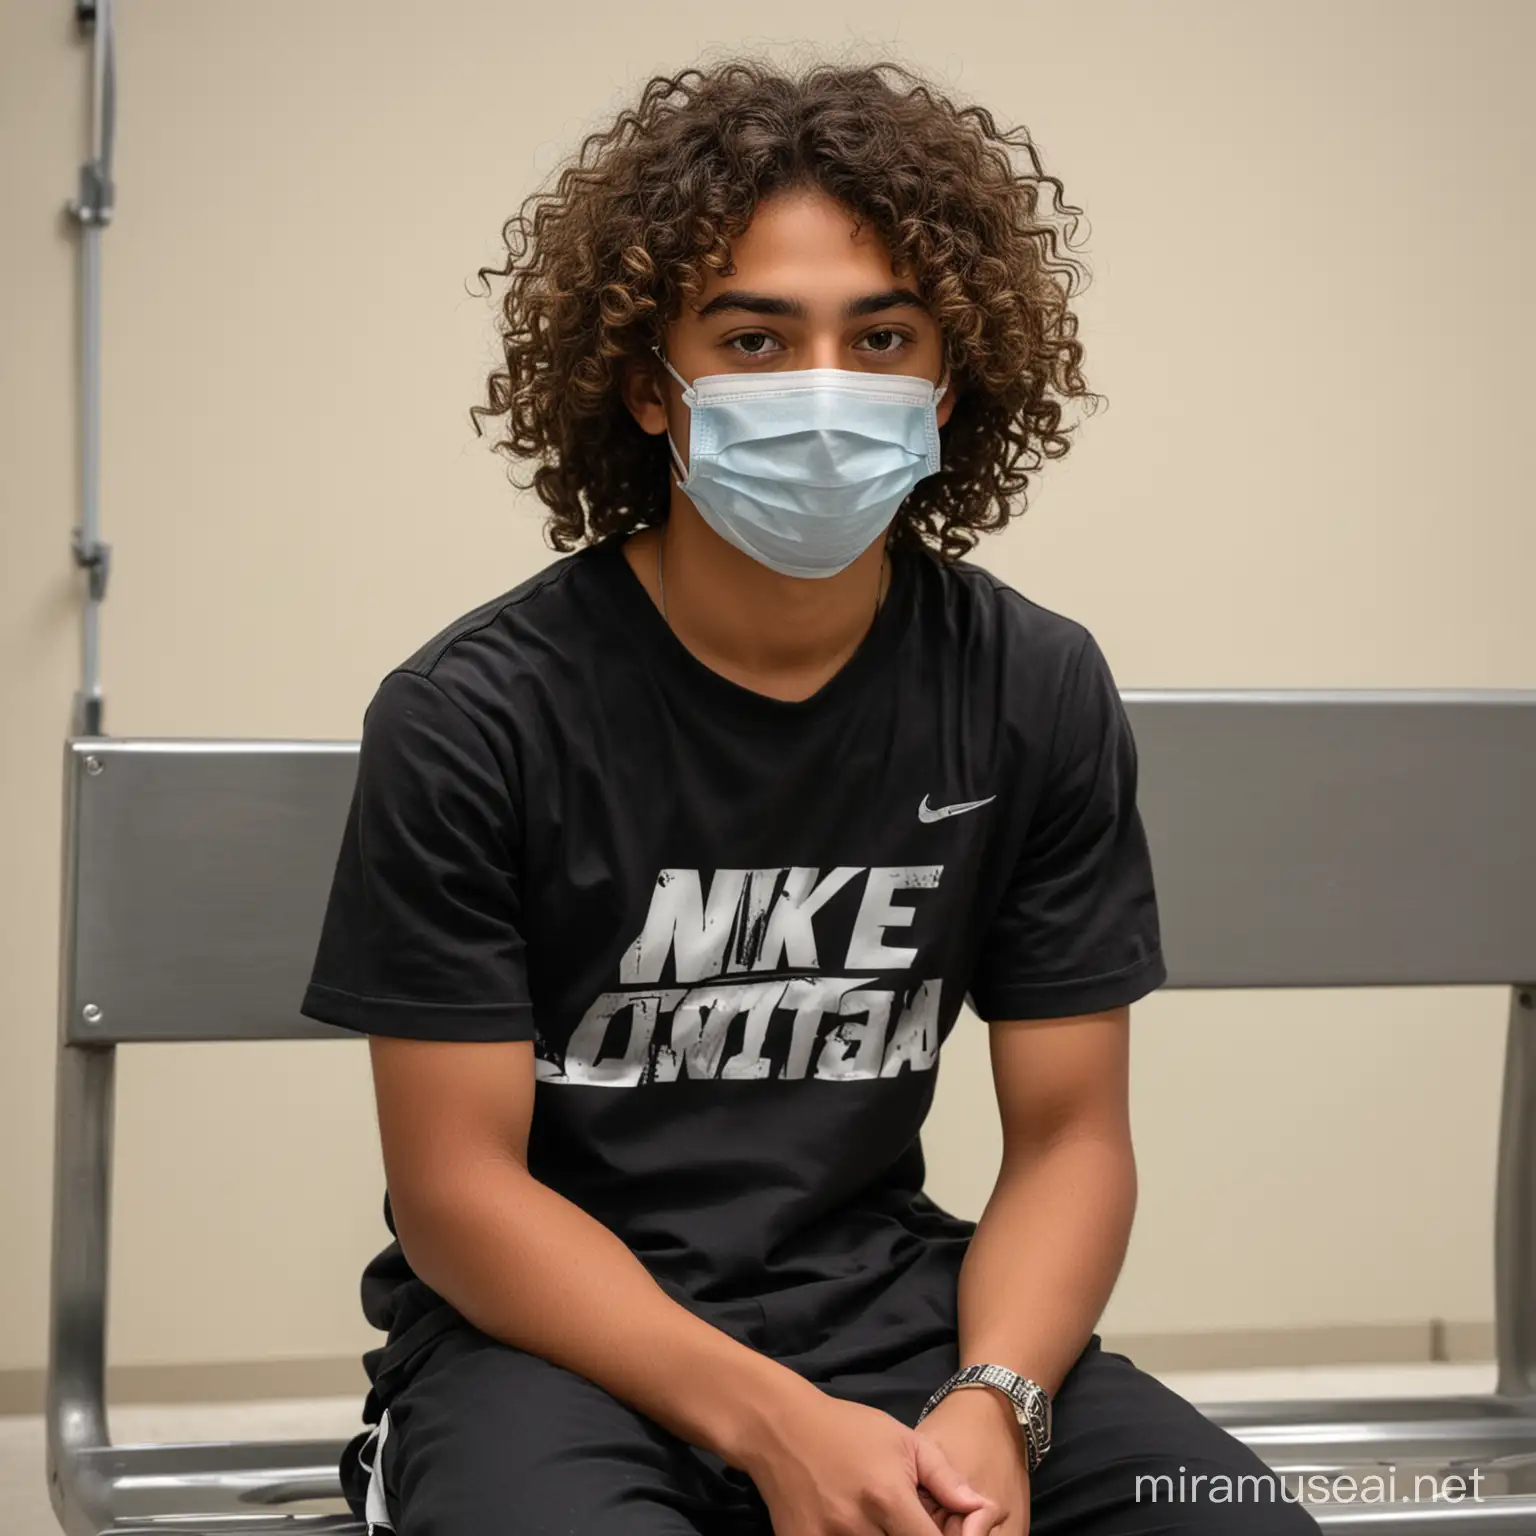 Boy with Curly Hair Wearing Mask in Hospital Waiting Room